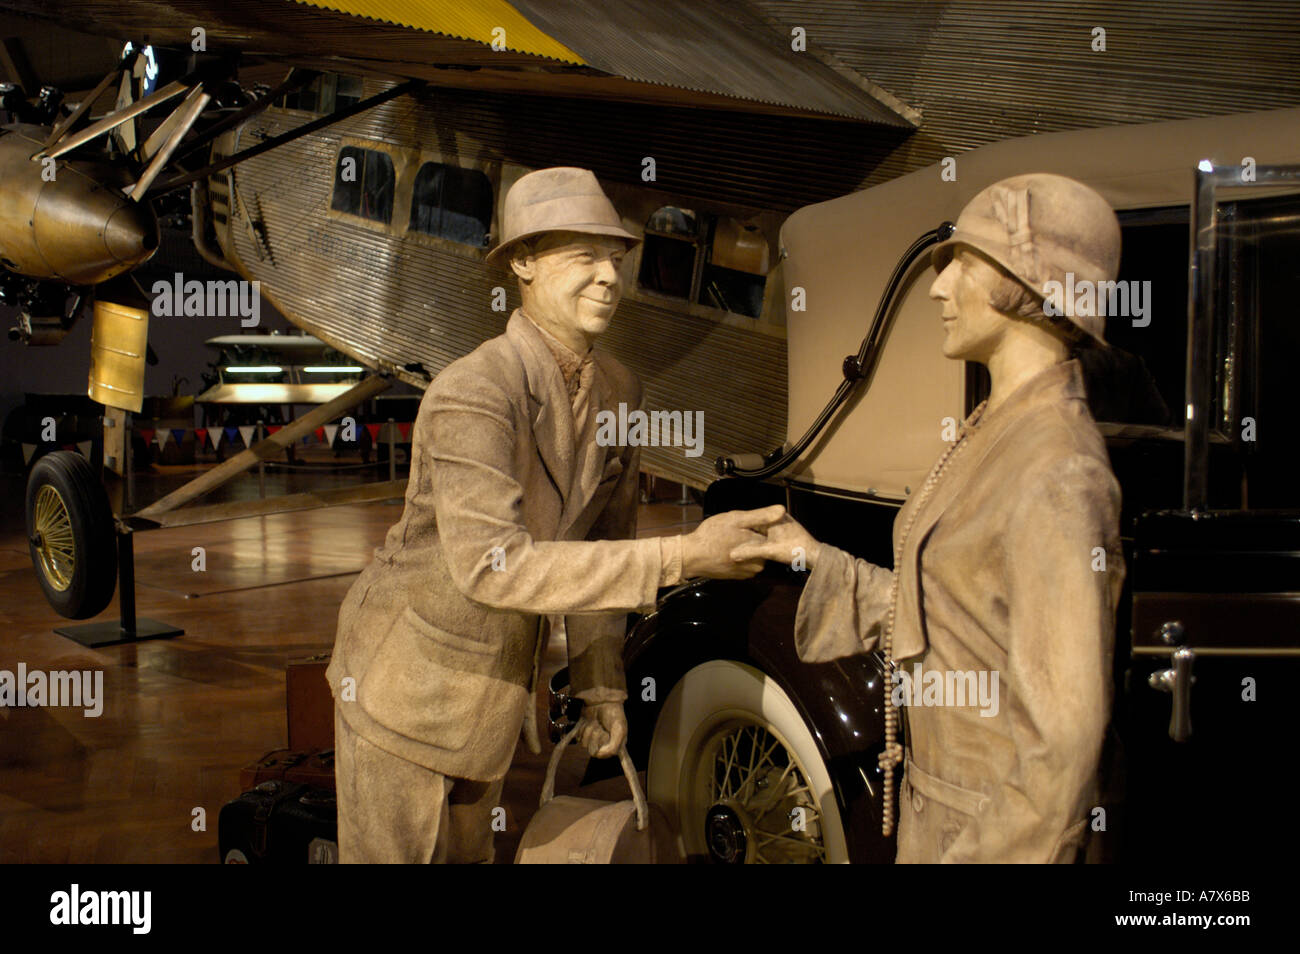 1928 Ford Trimotor airplane with airport farewell scene statues at the Henry Ford Musuem in Dearborn Michigan Stock Photo